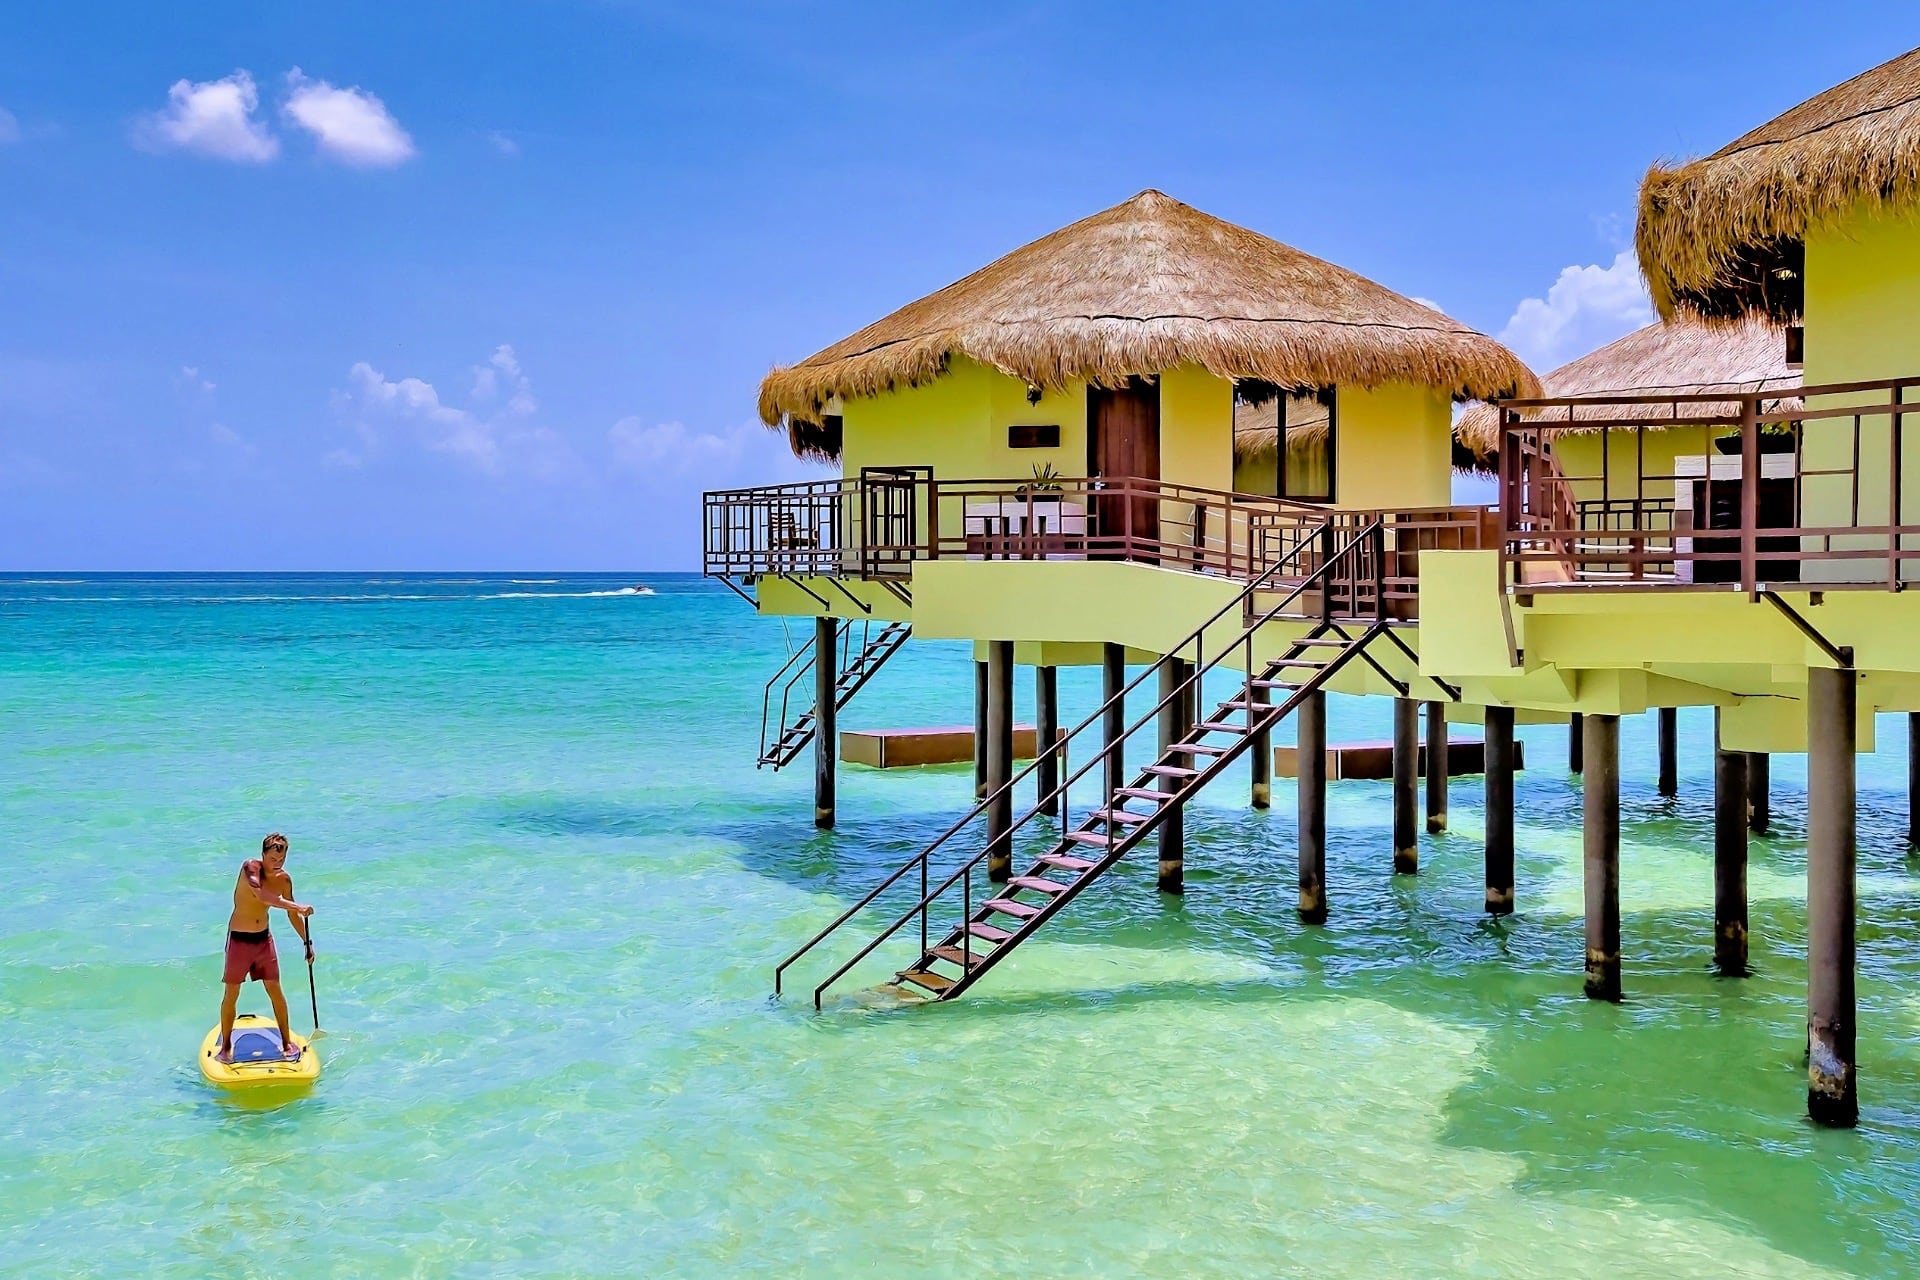 The Most Breathtaking Overwater Bungalows in Mexico